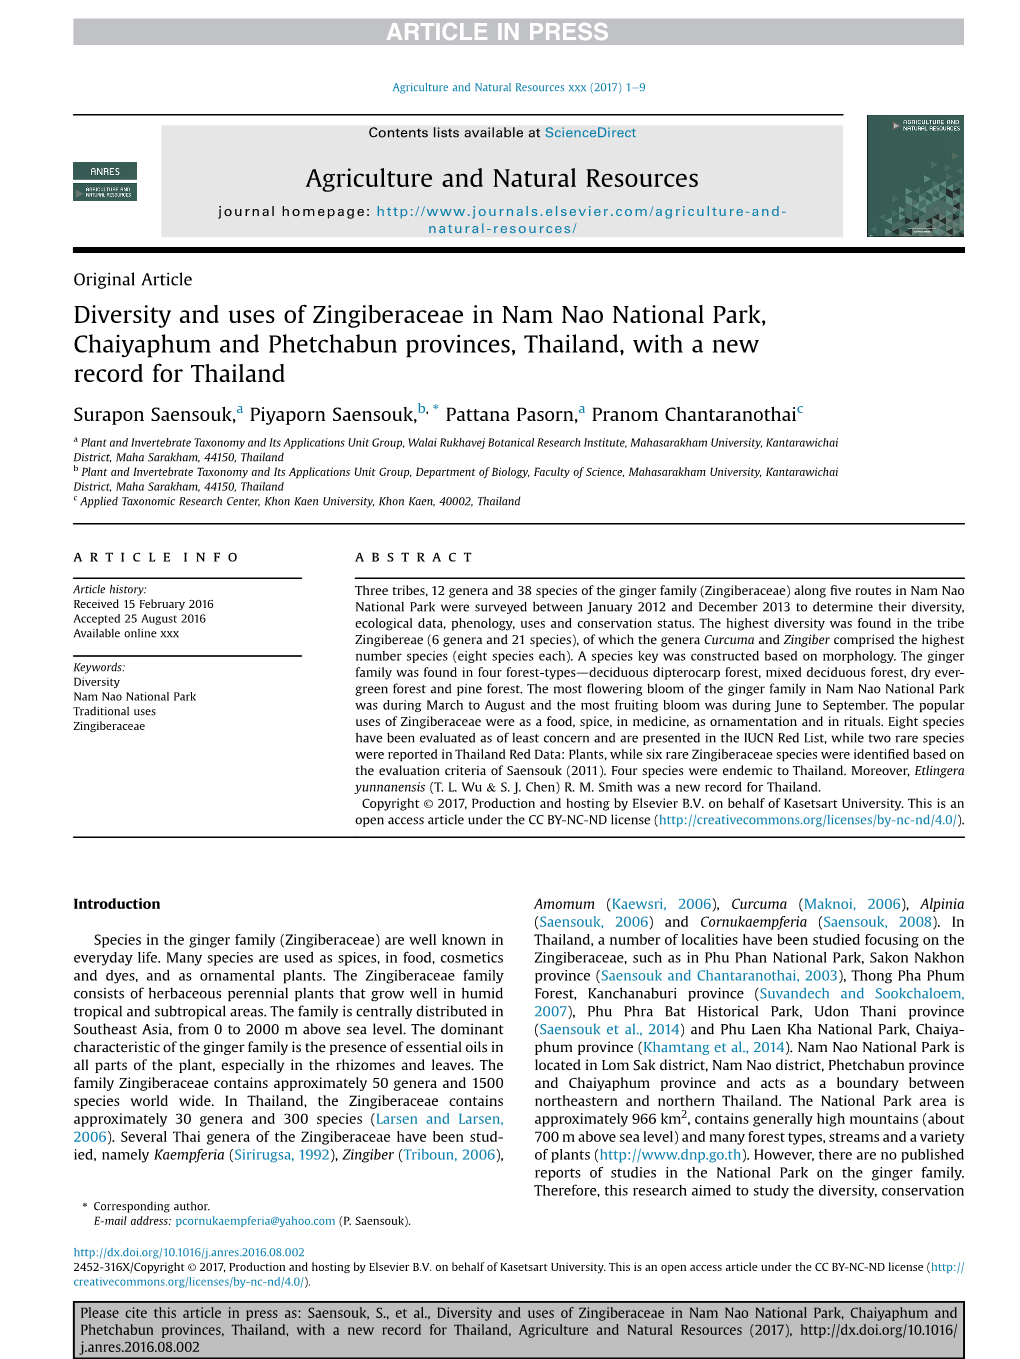 Diversity and Uses of Zingiberaceae in Nam Nao National Park, Chaiyaphum and Phetchabun Provinces, Thailand, with a New Record for Thailand